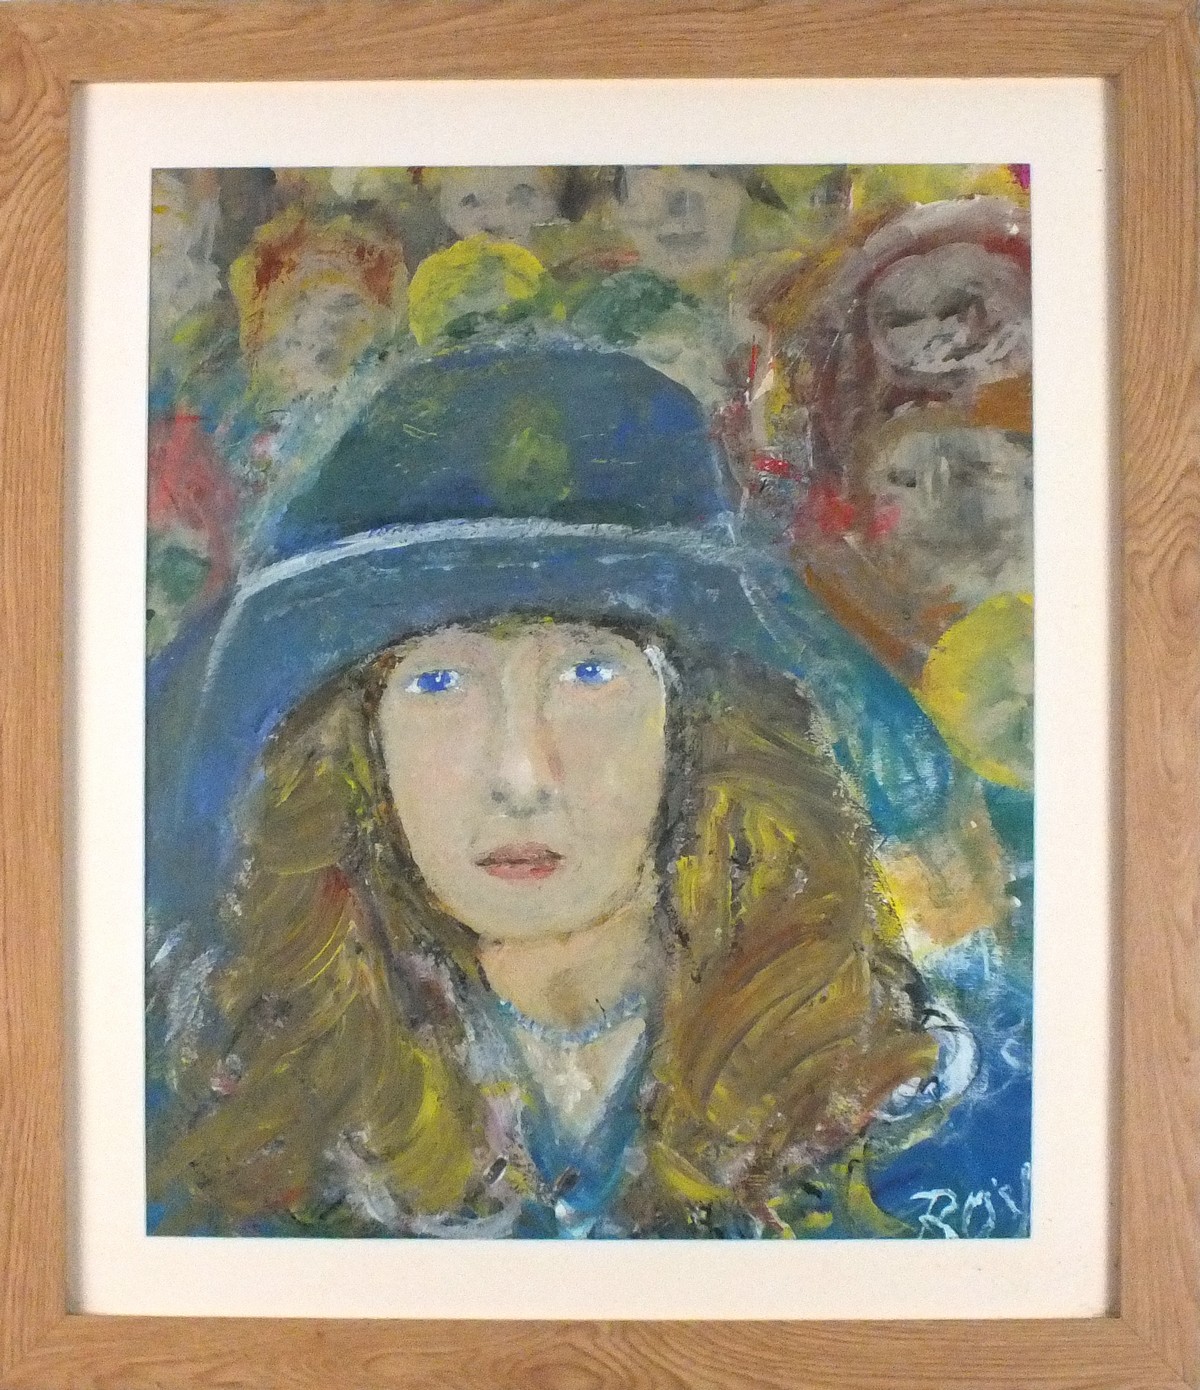 Roy DAVEY (British b. 1946) A Cornish Girl in a Blue Hat, Oil on board, Signed lower right, Signed - Image 2 of 2